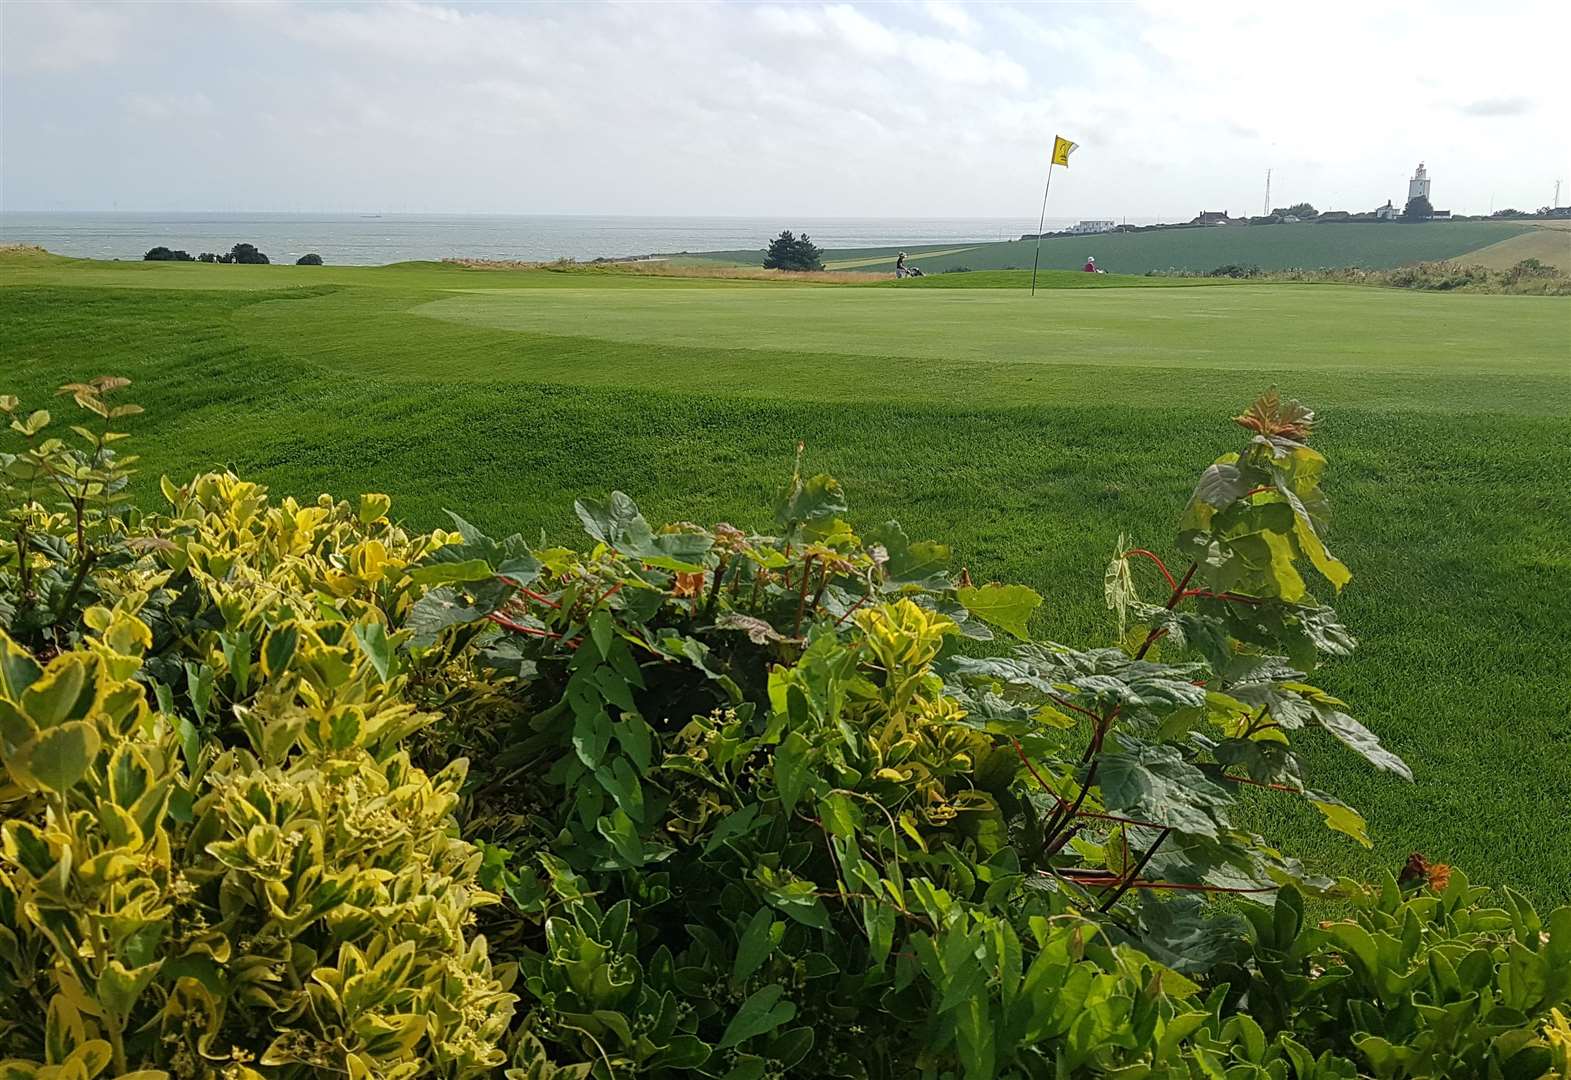 North Foreland Golf Club is today's one of the county's finest